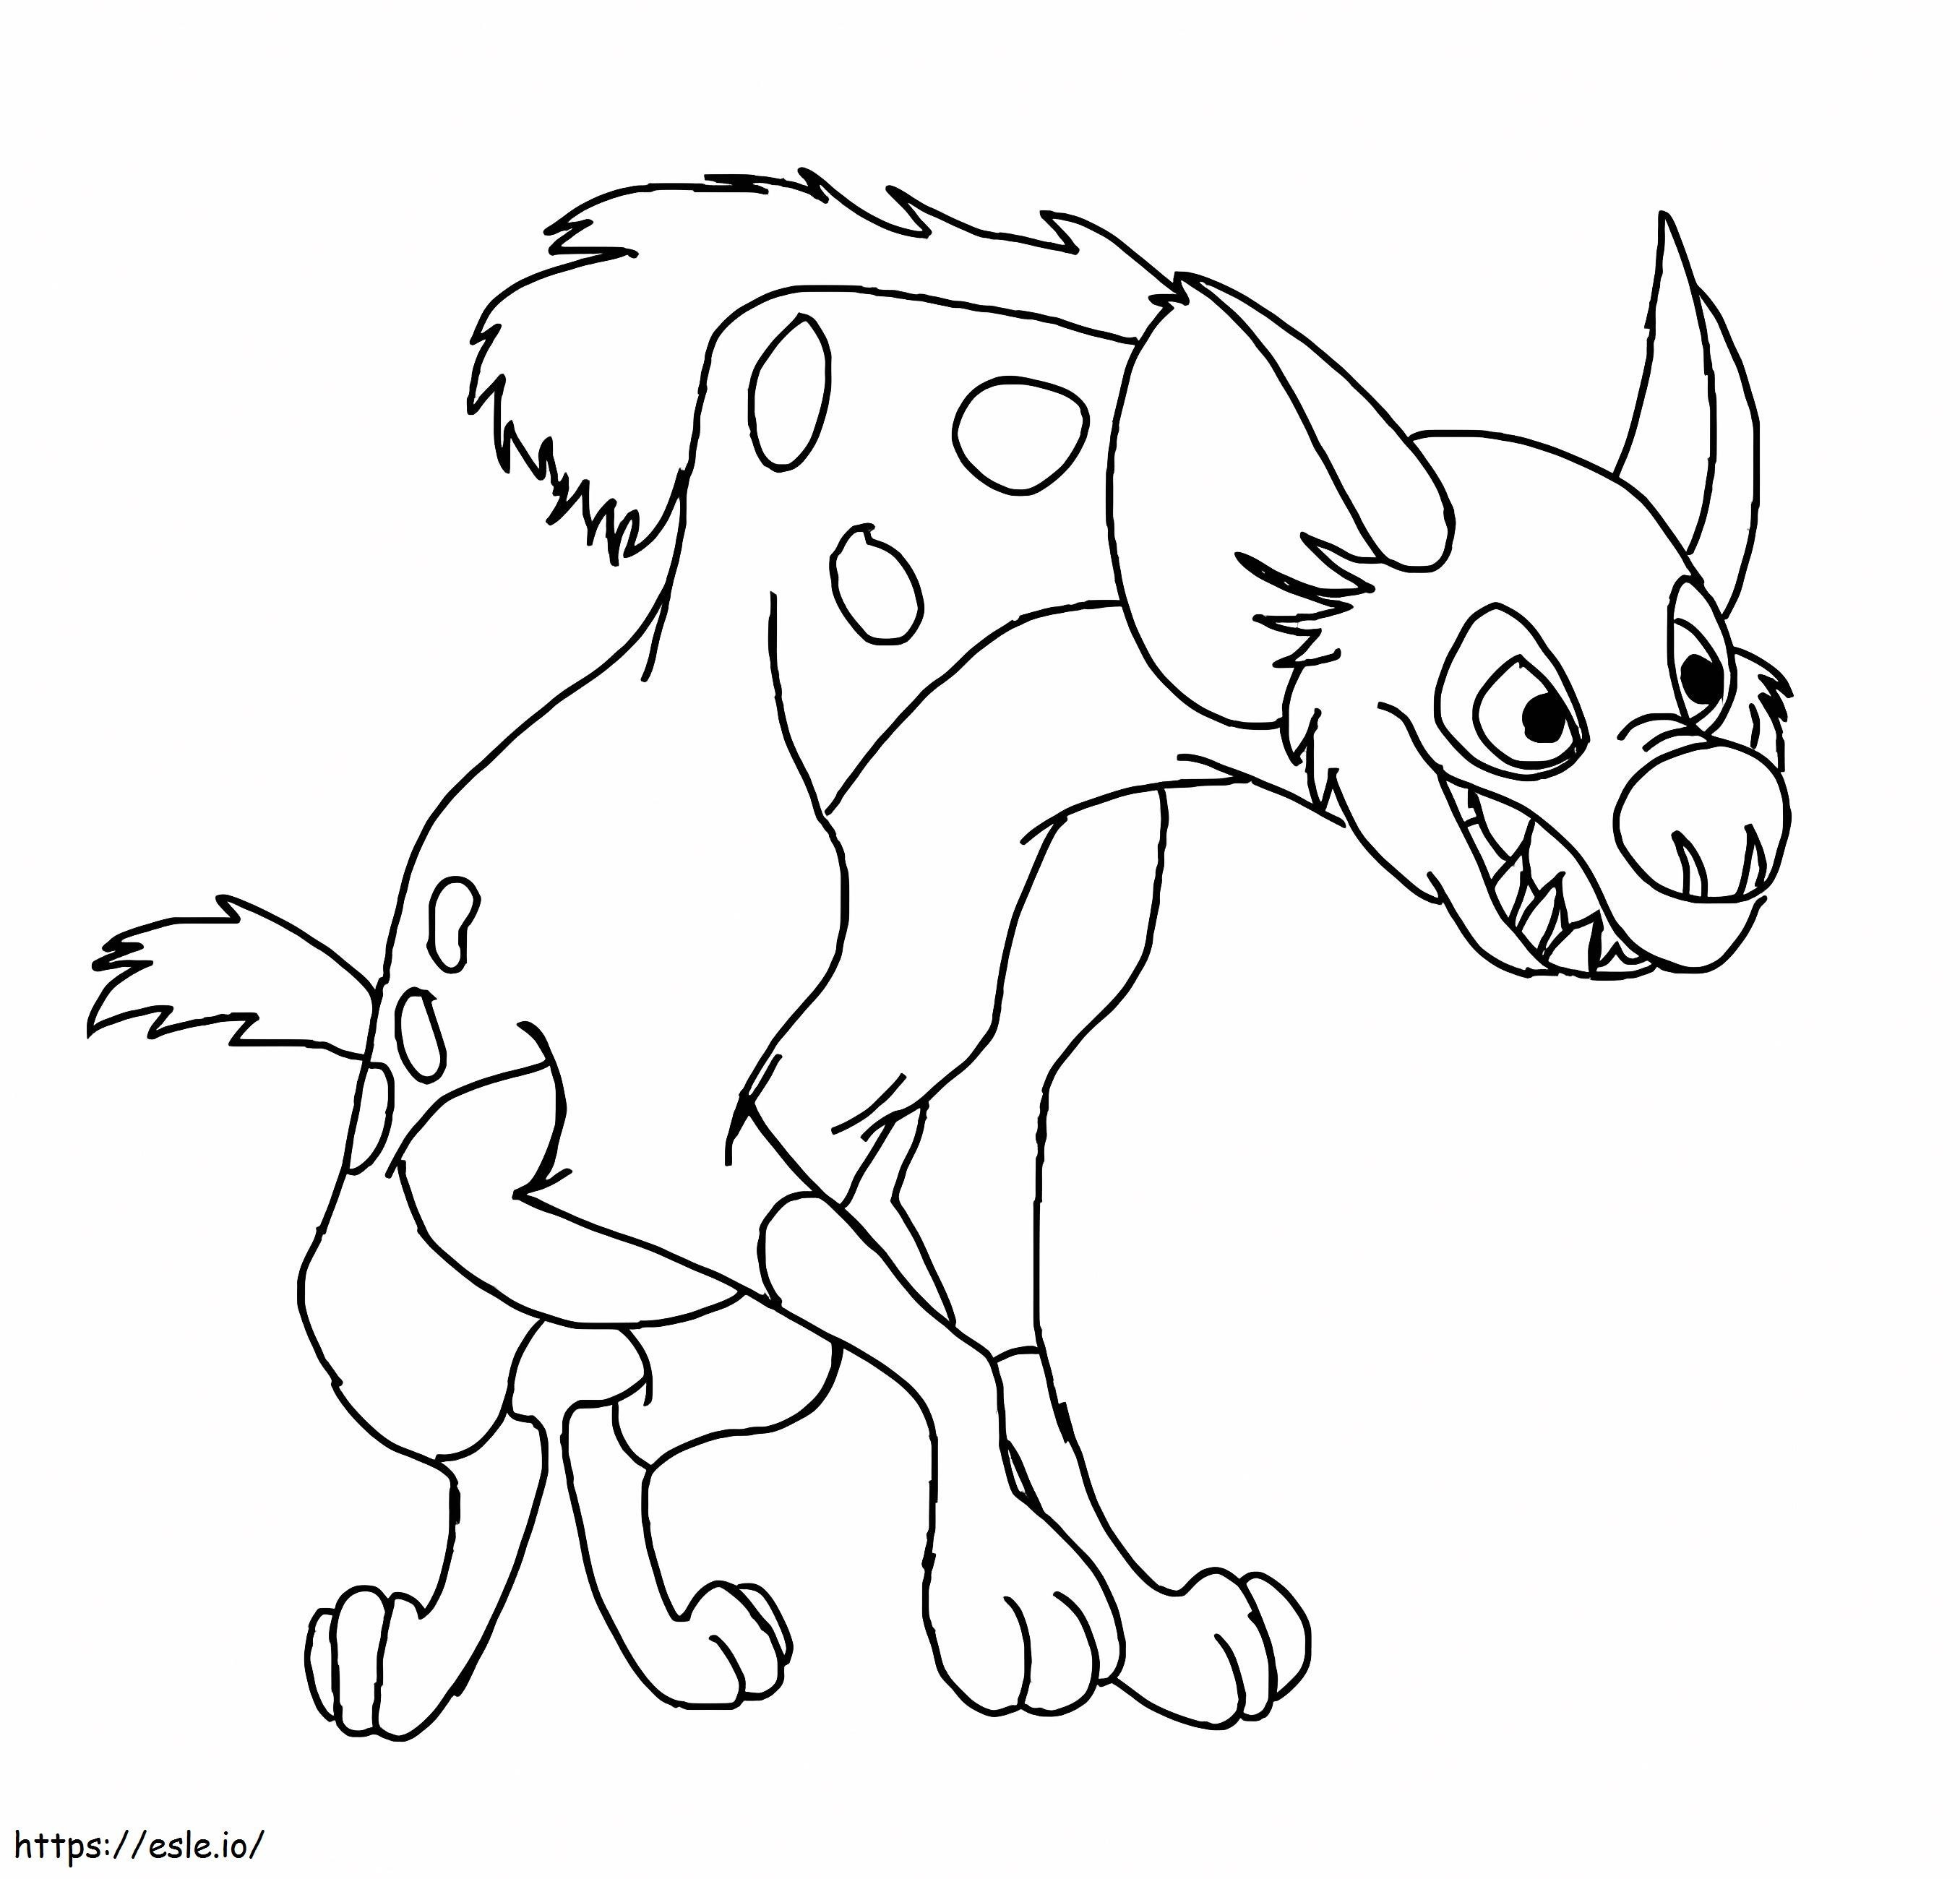 Animated Hyena coloring page